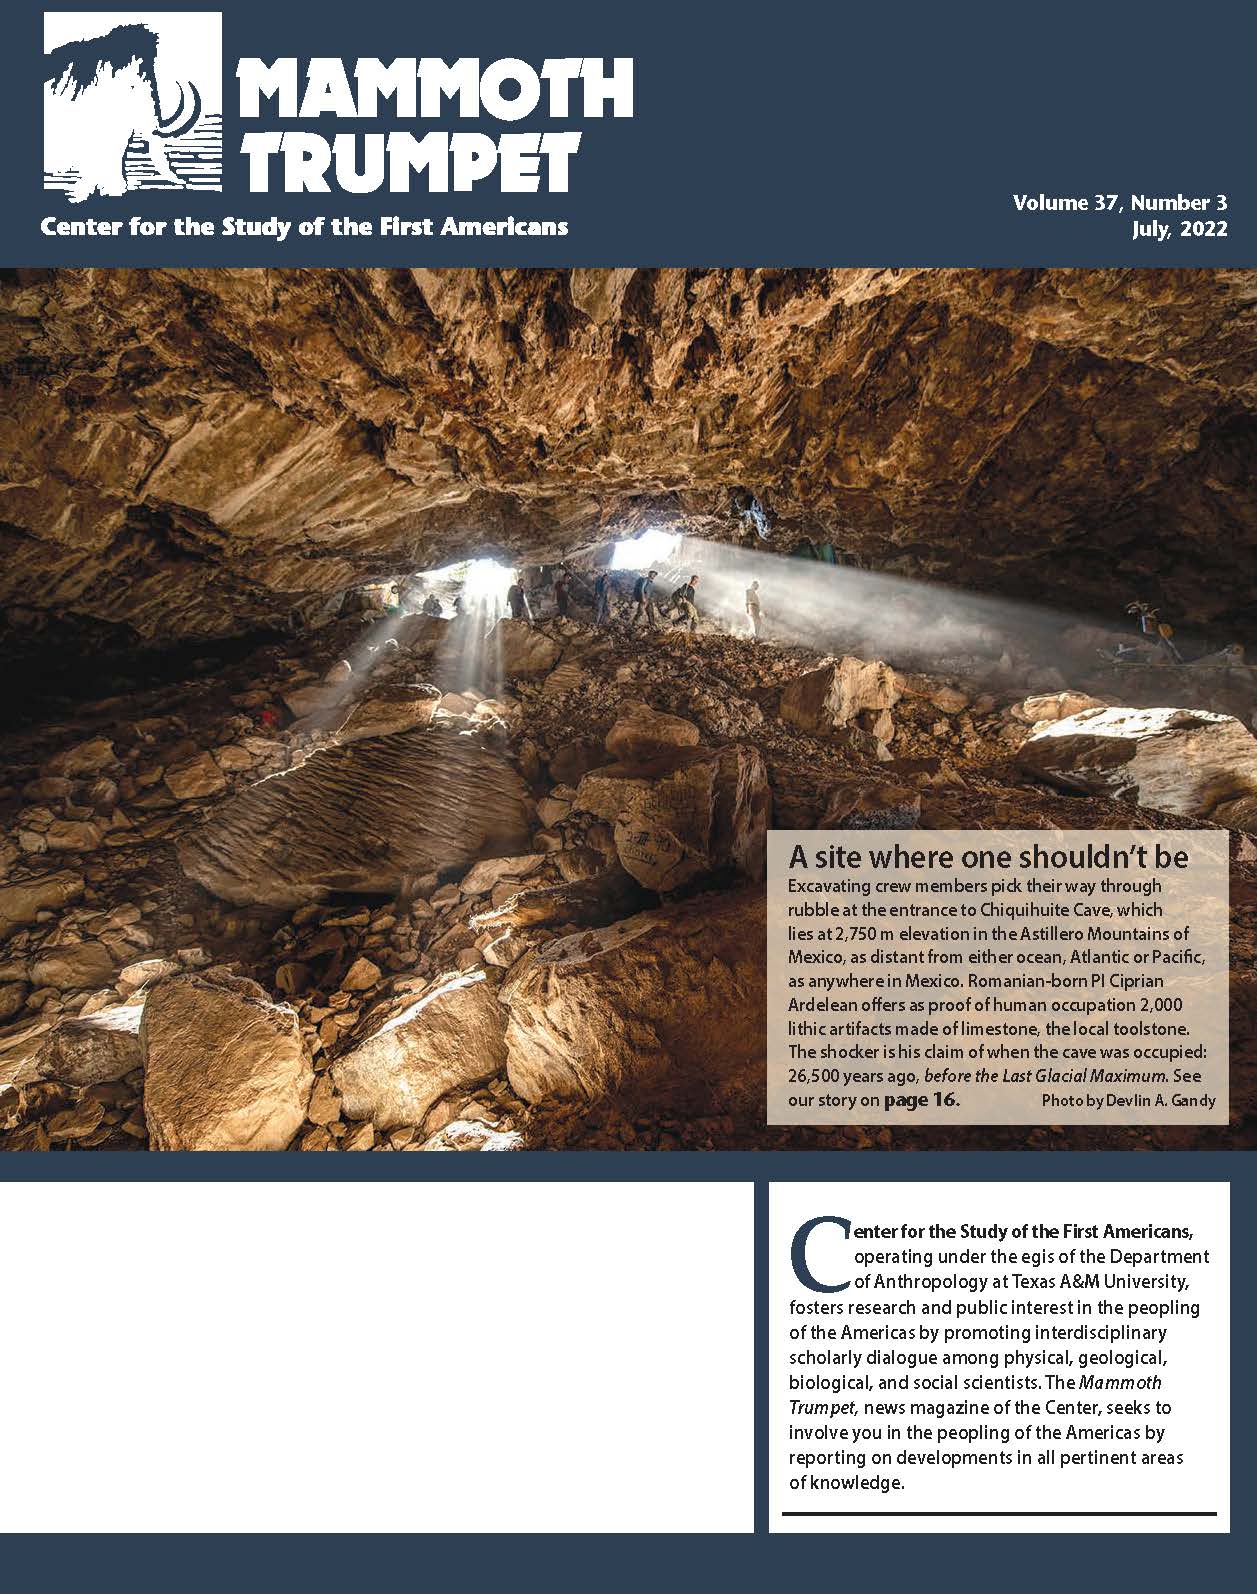 Cover of Mammoth Trumpet July 2022 featuring cave entrance of Chiquihuite cave.